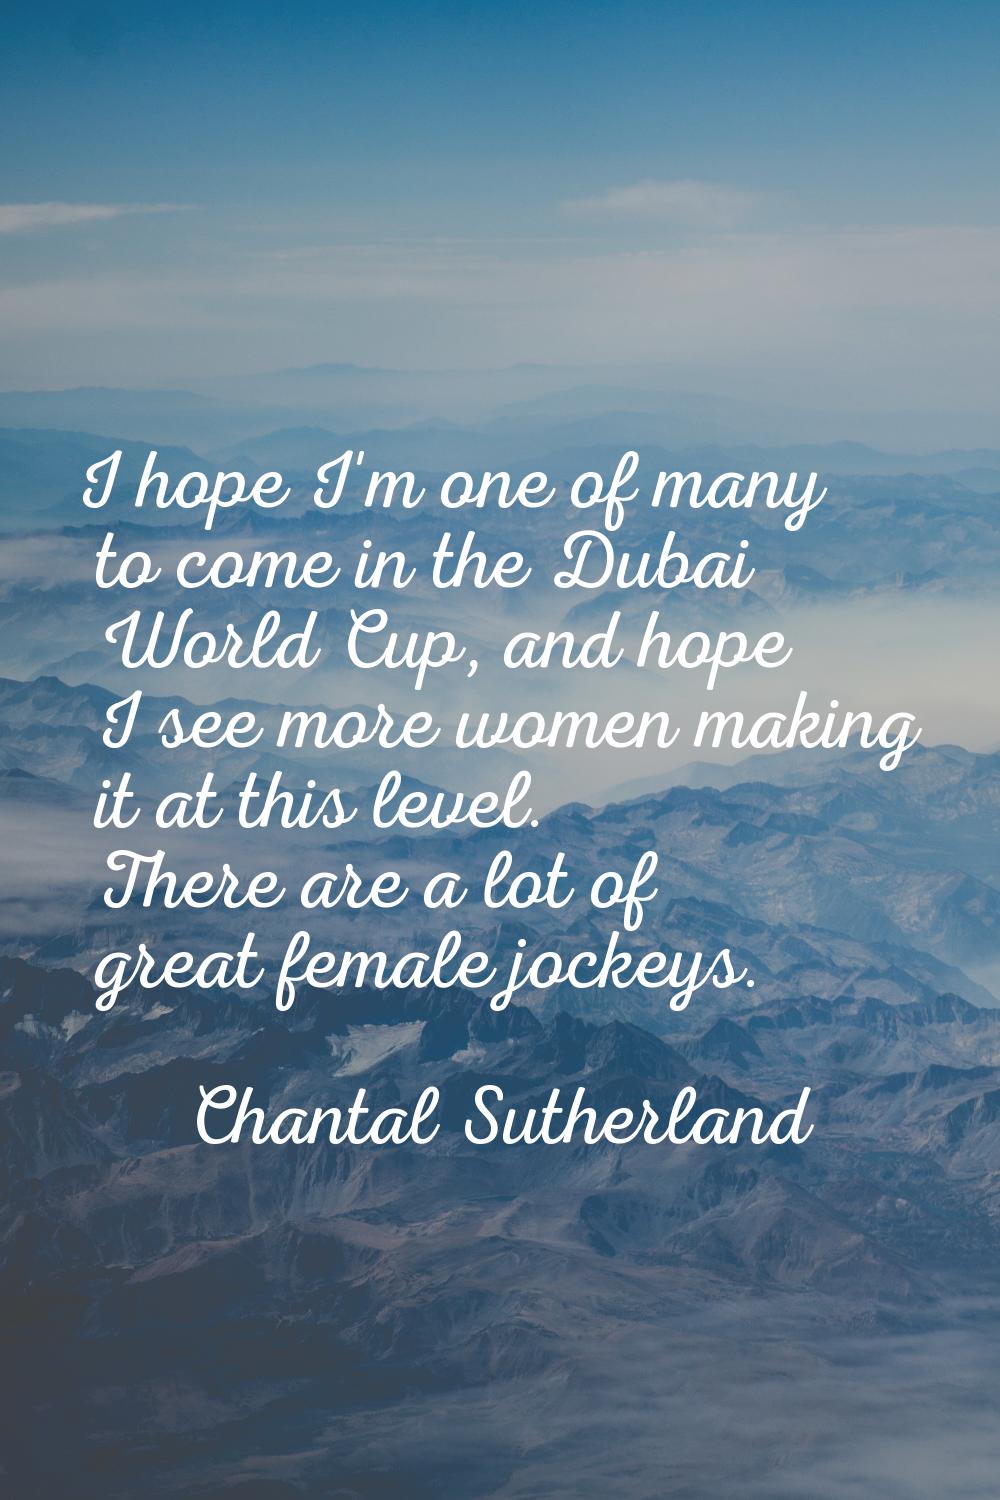 I hope I'm one of many to come in the Dubai World Cup, and hope I see more women making it at this 